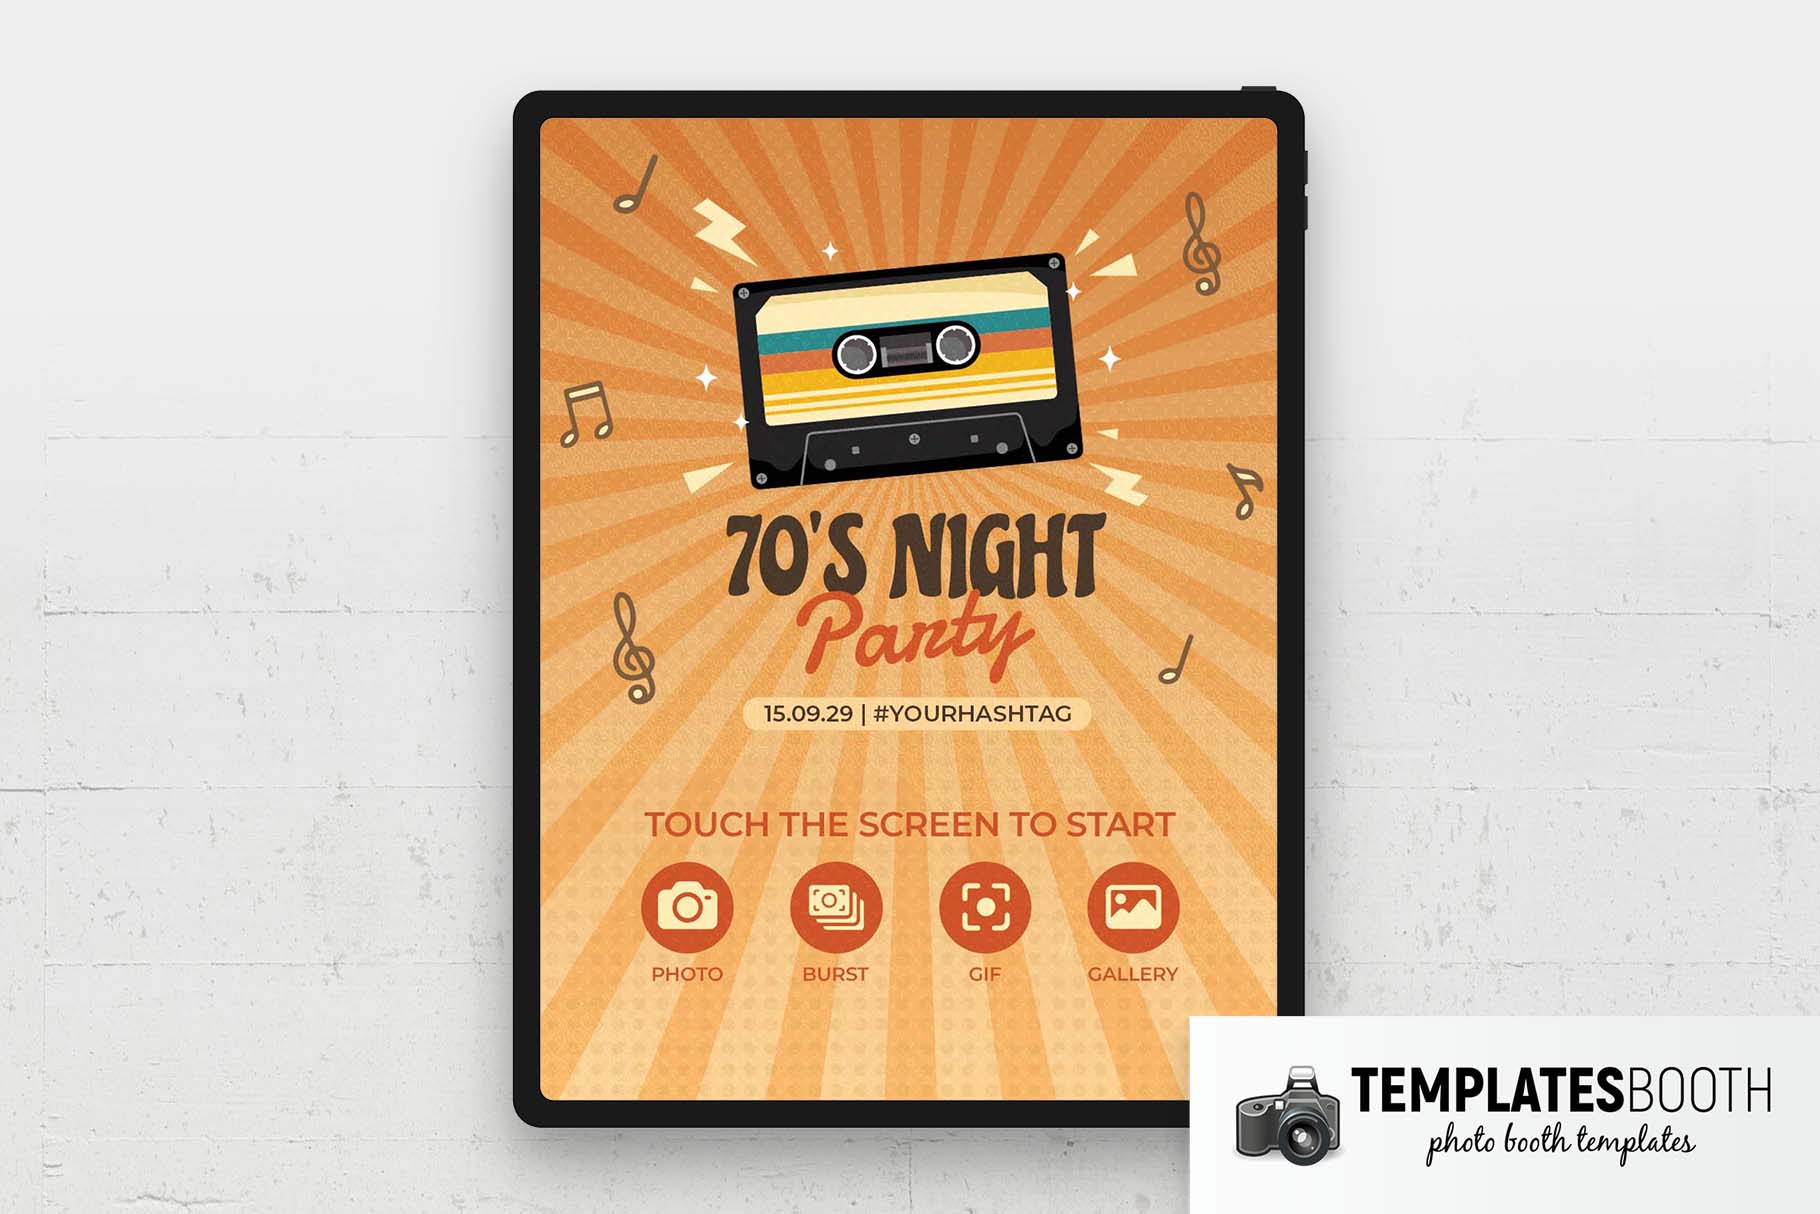 70s Night Party Photo Booth Welcome Screen